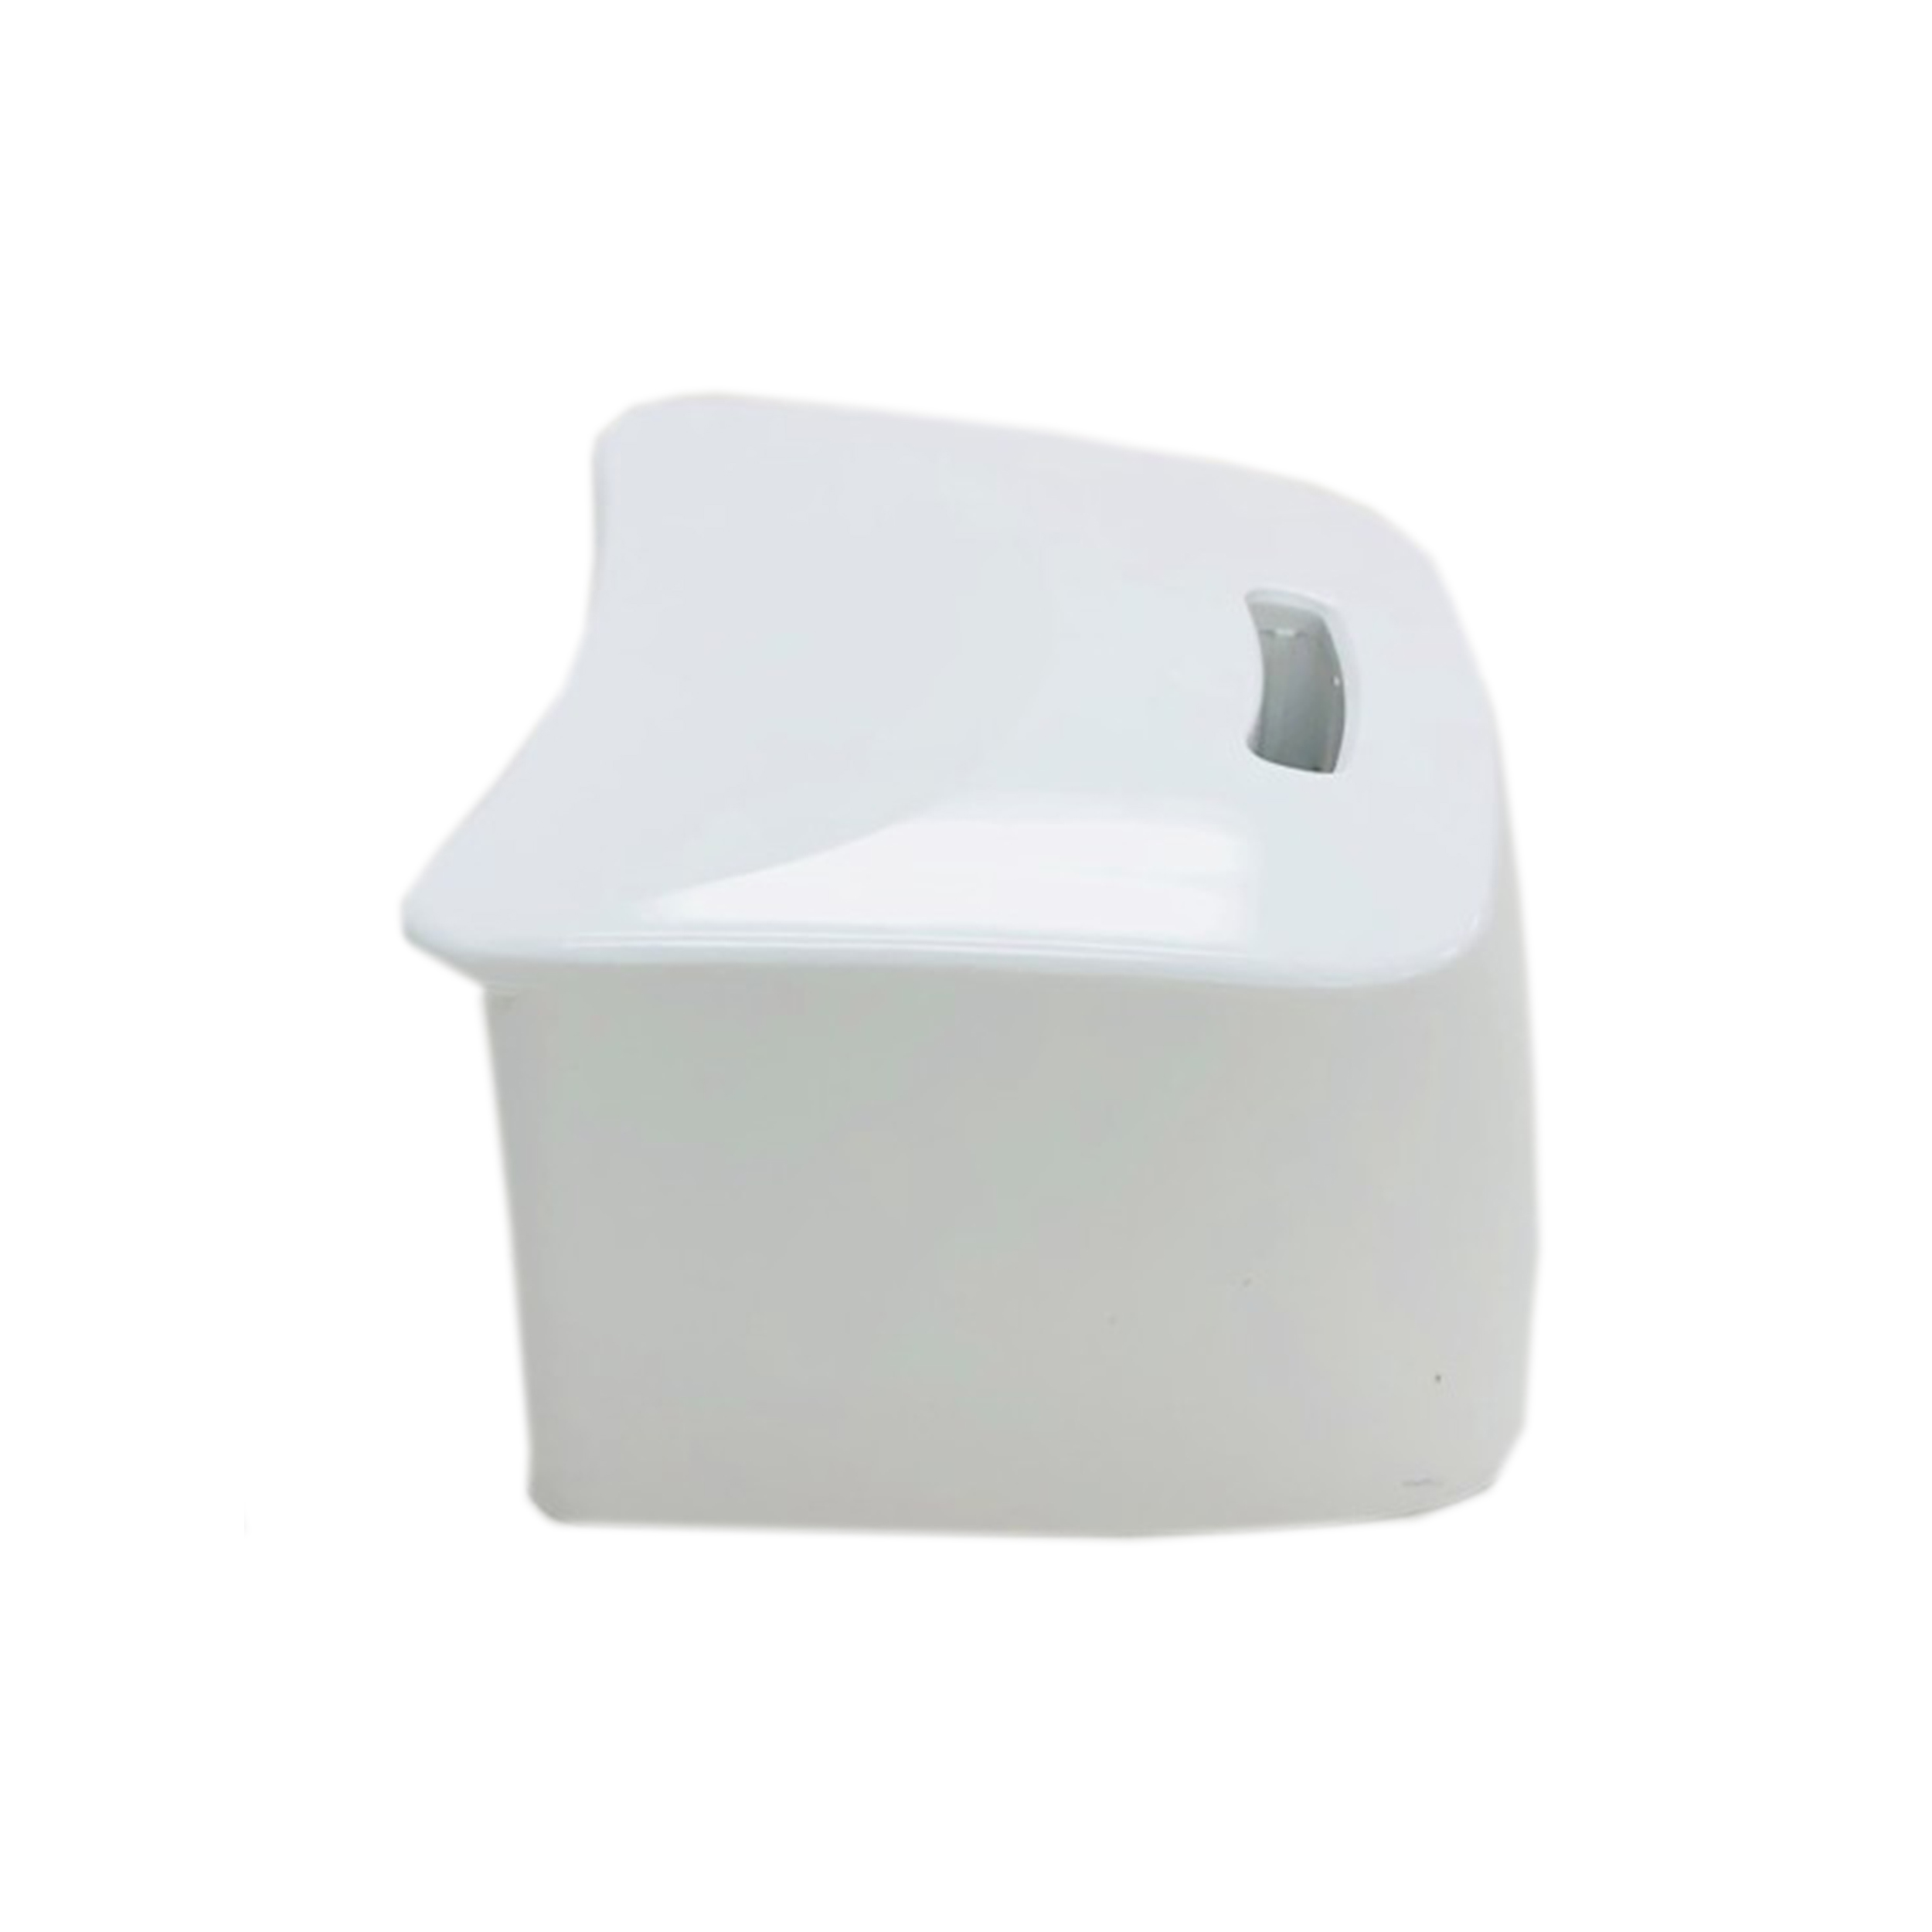 Standard Chinrest (High) (M0401441_COVER-ACCESSORIES CHIN BLOCK-HIGH/ABS/M0041658 High)